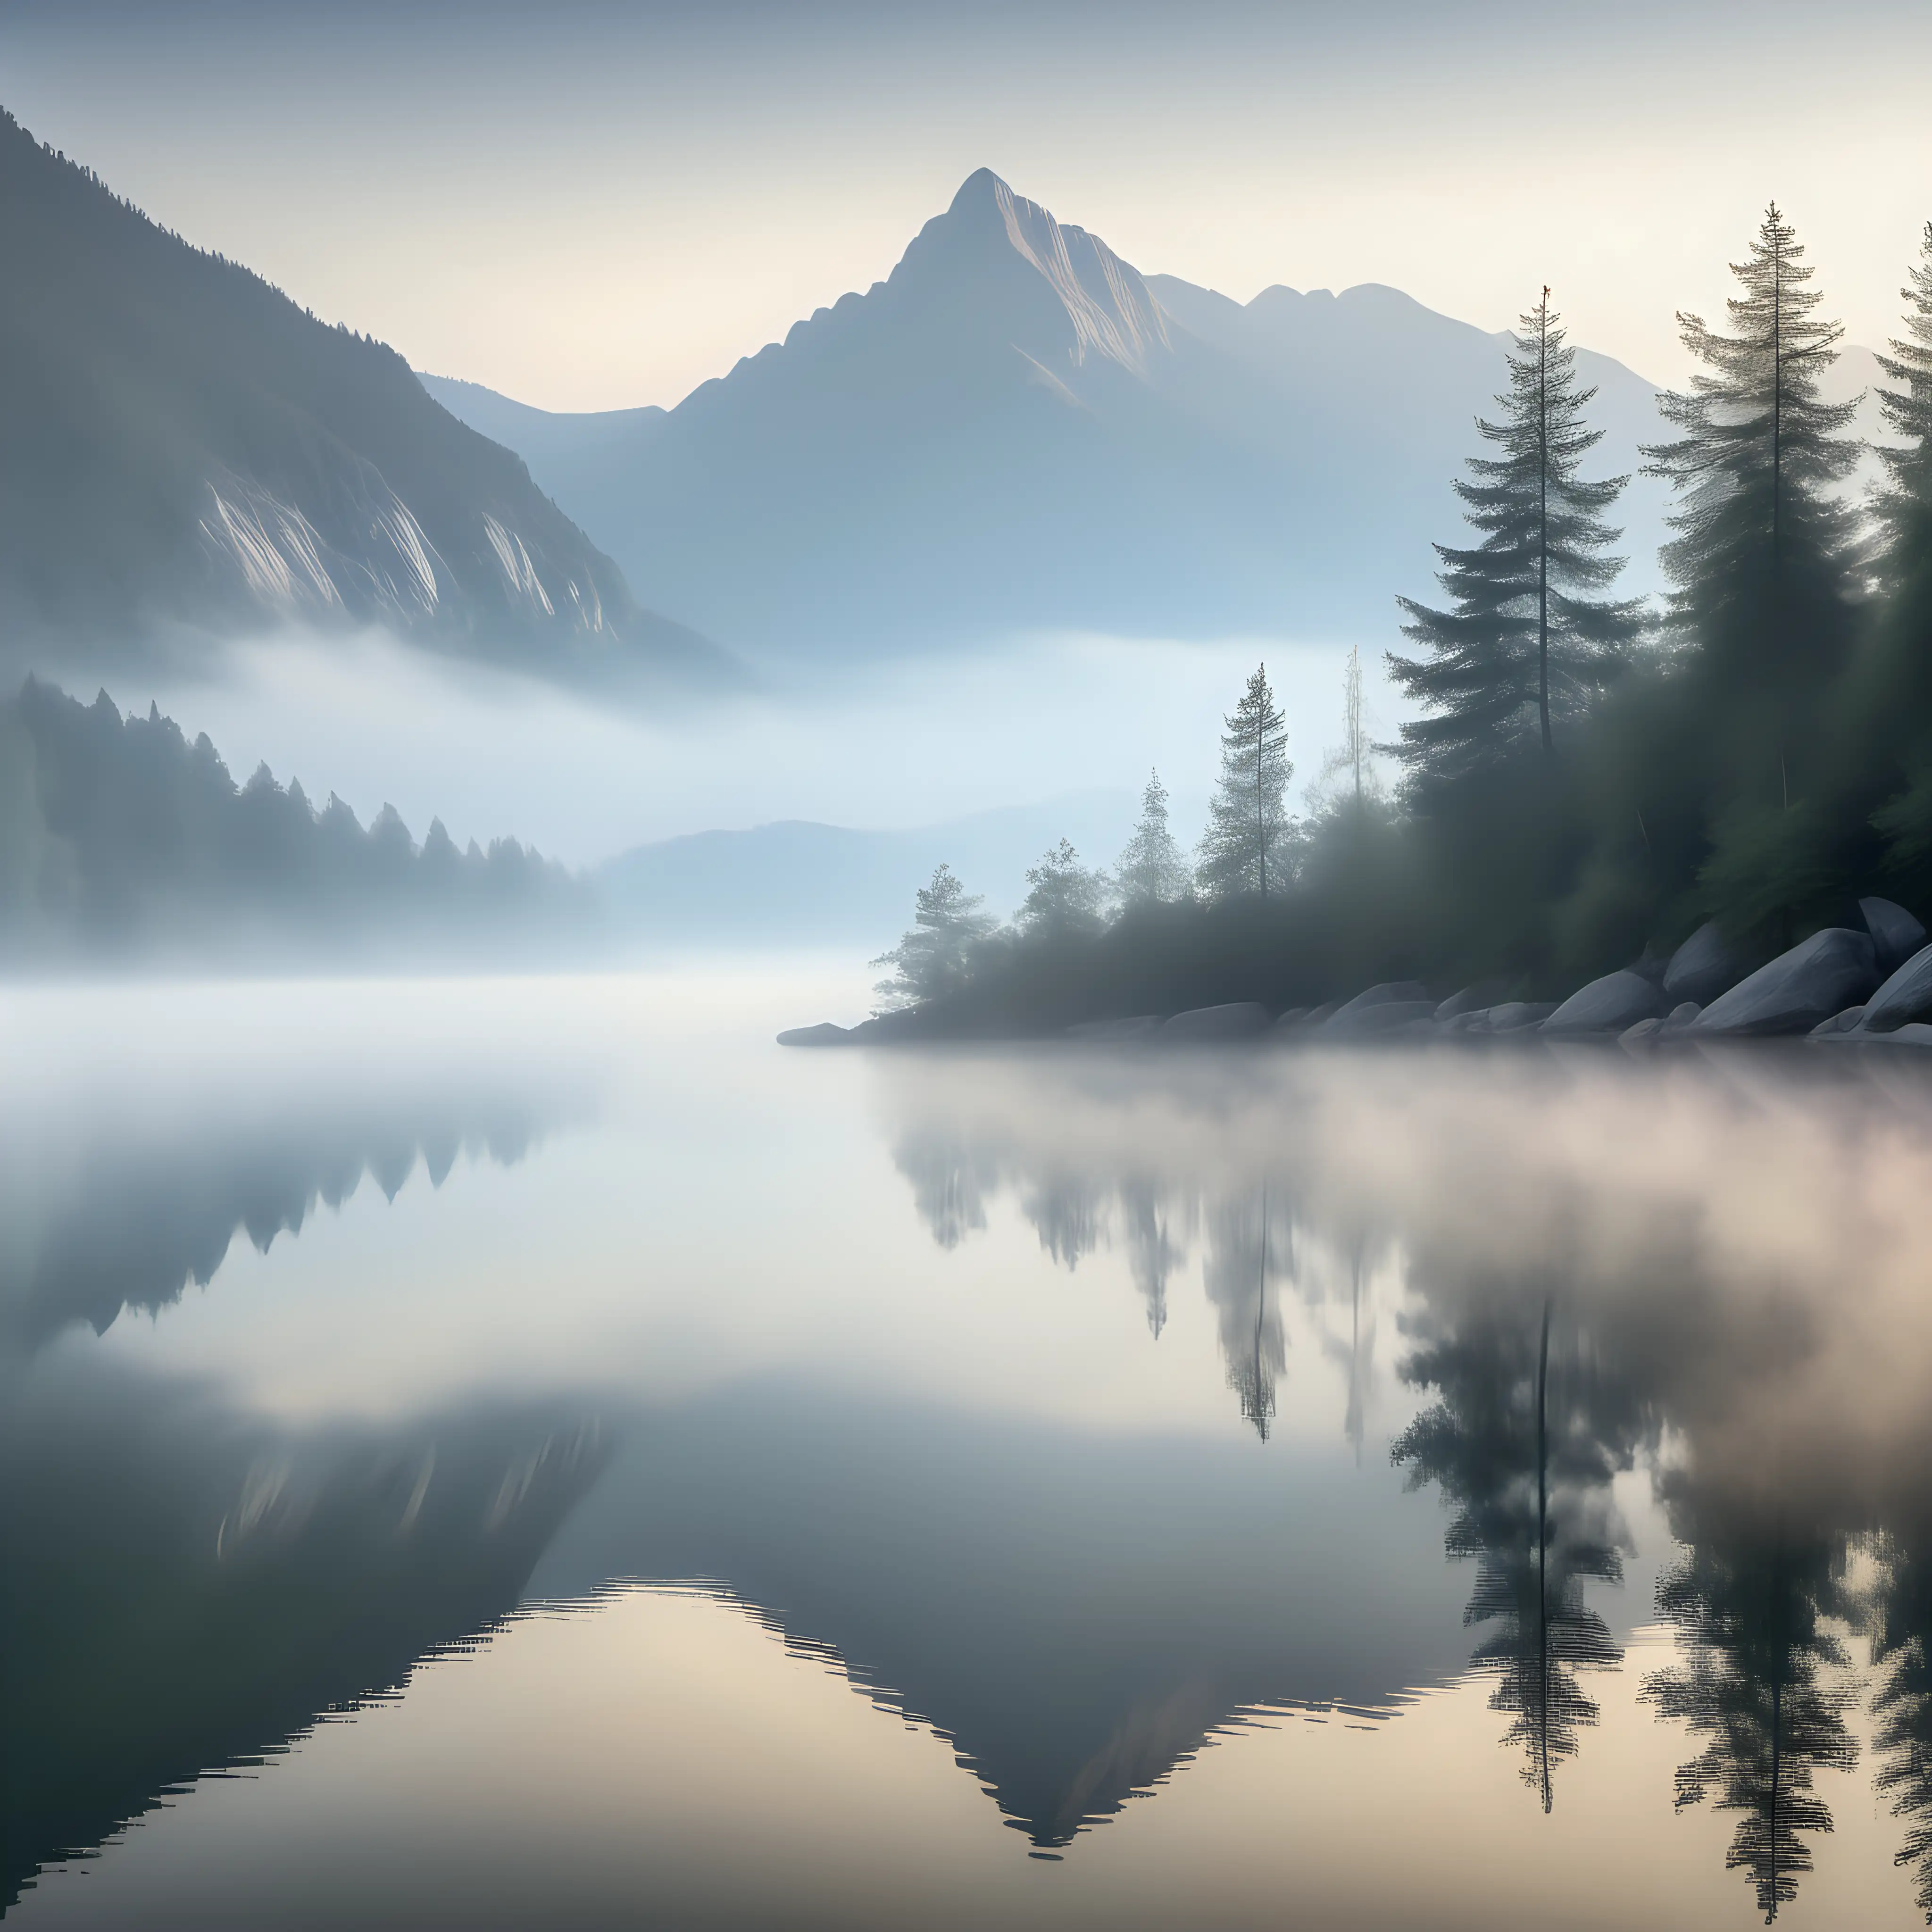 A calm mountain lake veiled in ethereal morning mist, with distant peaks emerging through the soft haze, shot with Sony Alpha a9 II and Sony FE 200-600mm f/5.6-6.3 G OSS lens, natural light, hyper realistic photograph, ultra detailed